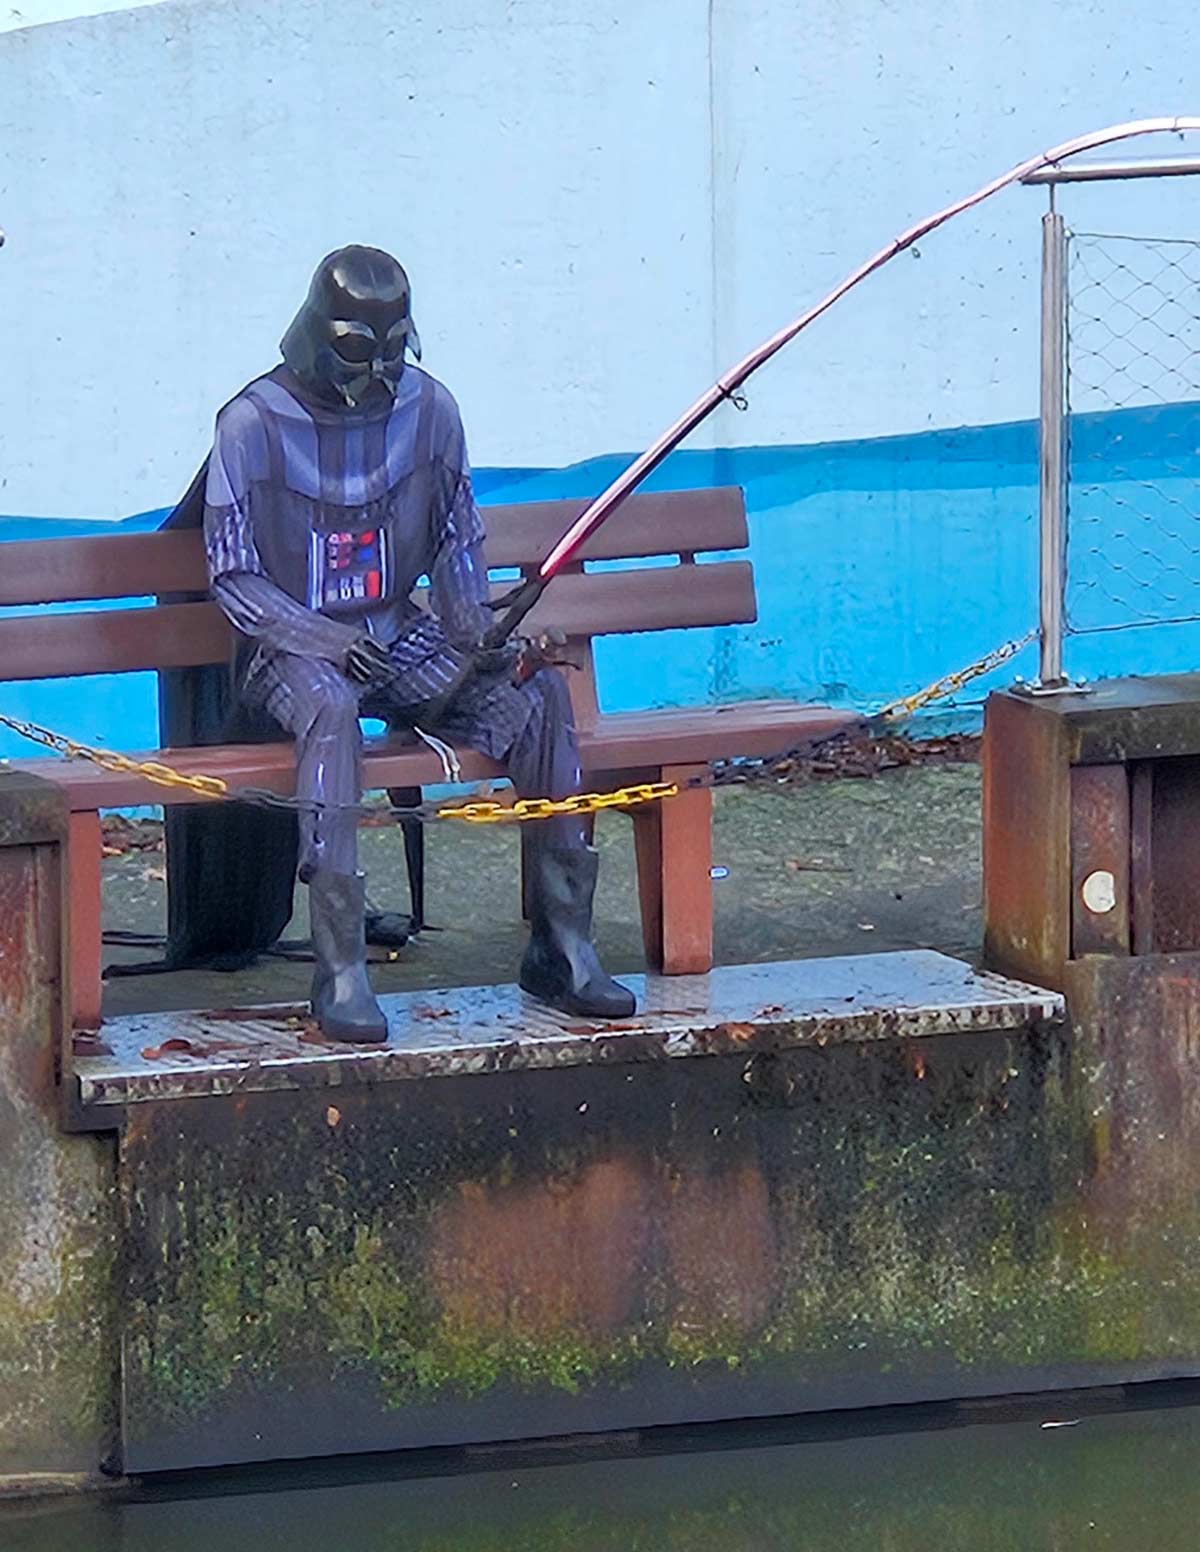 My local zoo has a statue of Darth Vader fishing